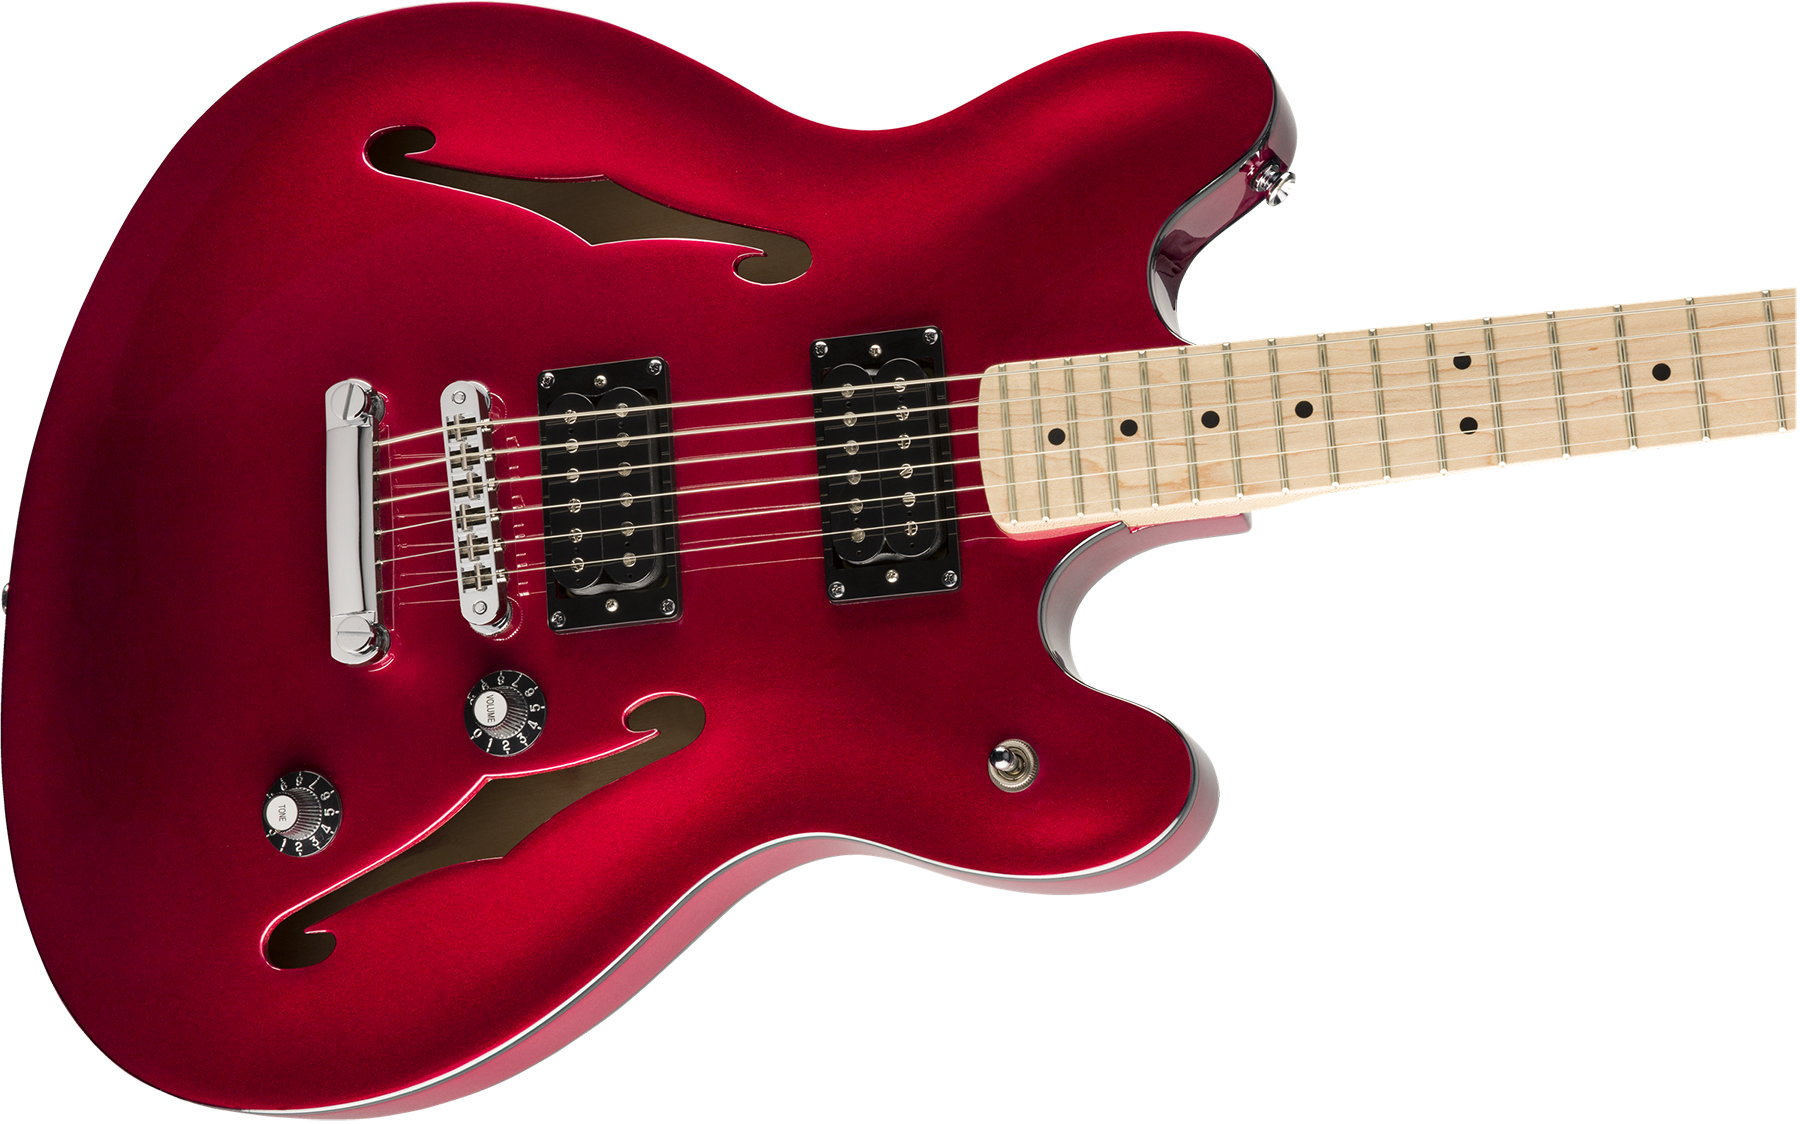 Squier Starcaster Affinity 2019 Hh Ht Mn - Candy Apple Red - Semi-Hollow E-Gitarre - Variation 2